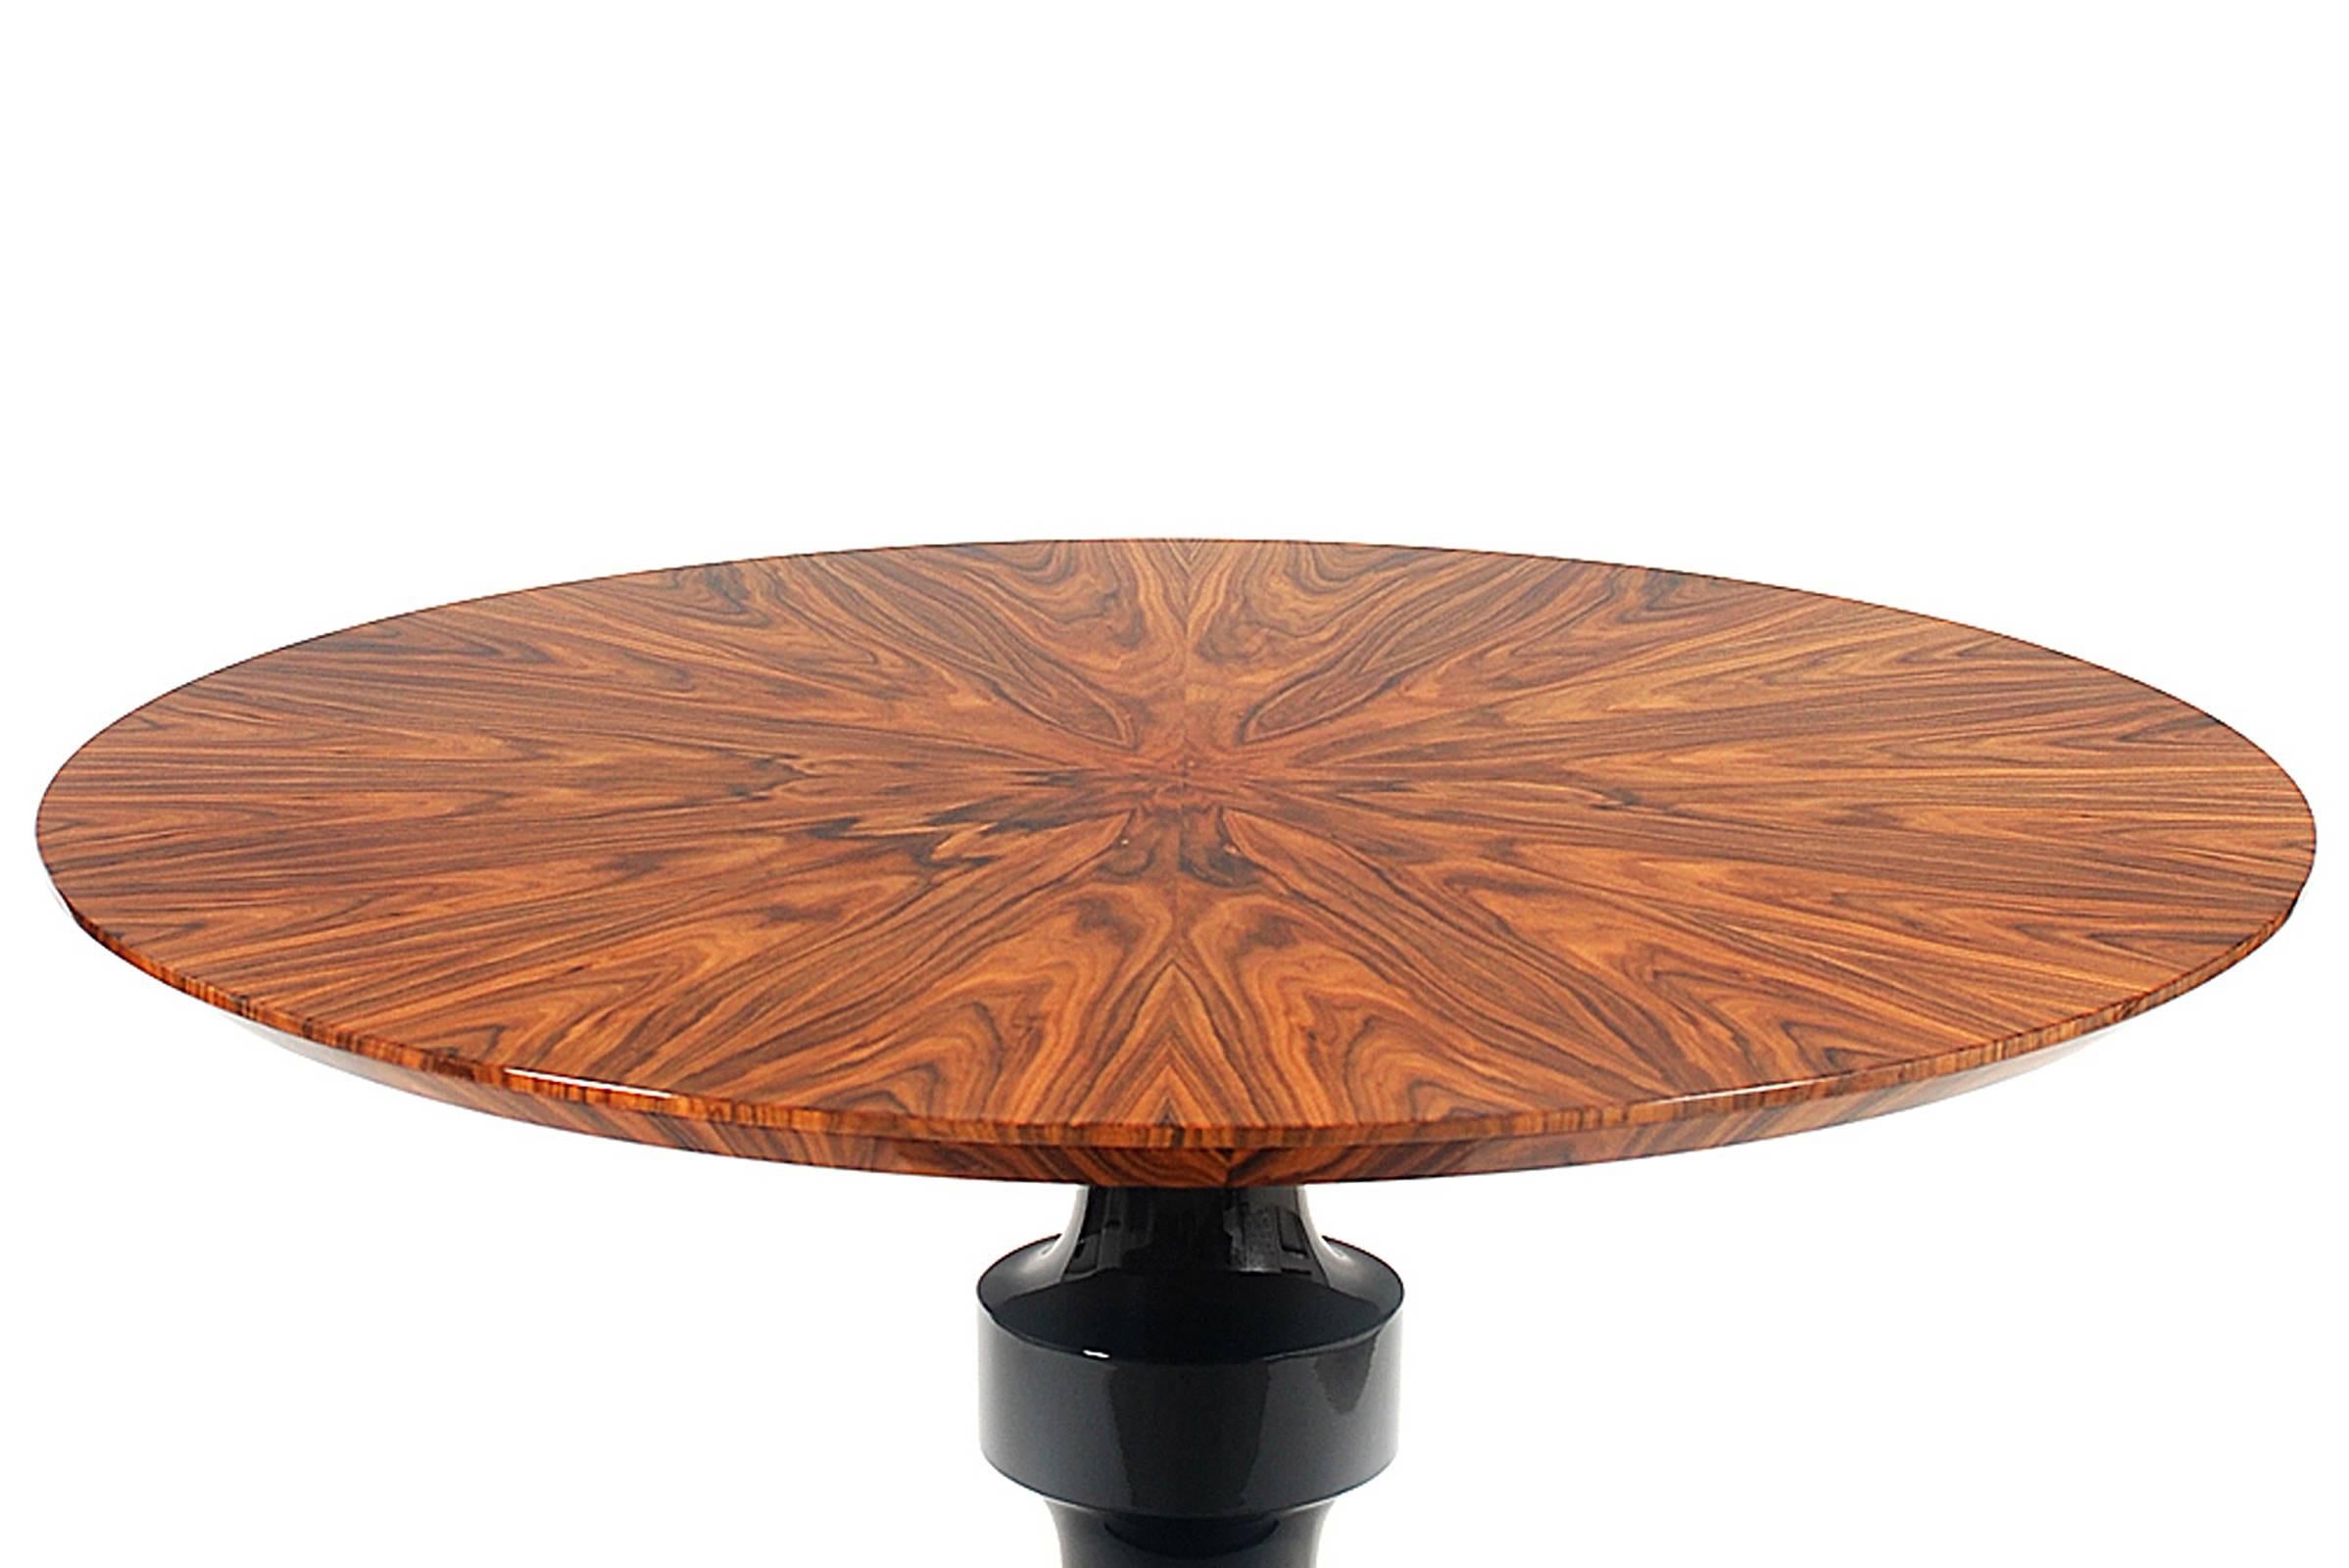 Coffee table chess is handcrafted solid wood.
Pedestal base with a radial matched wood.
Veneer of rosewood top.
